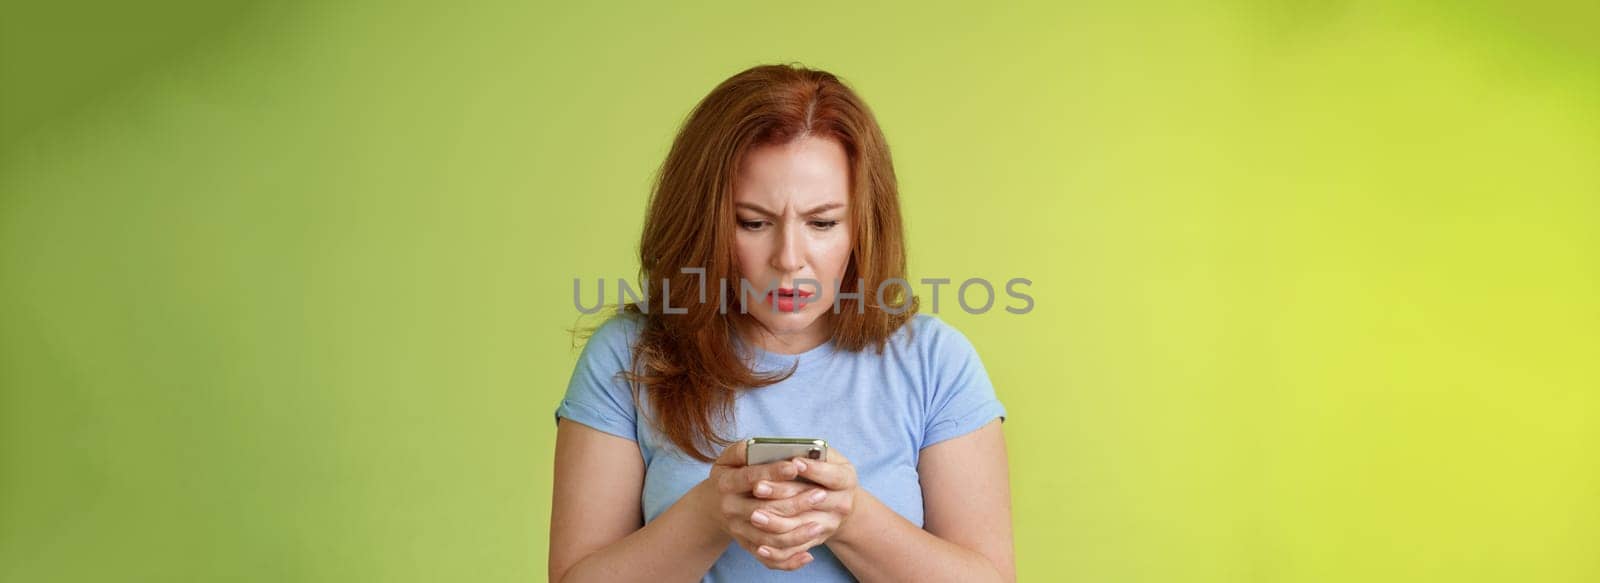 Lifestyle Concept - Confused unsure redhead middle-aged woman learn how use social media. trying understand emoji look intense focused smartphone display reading important news message stand green background.